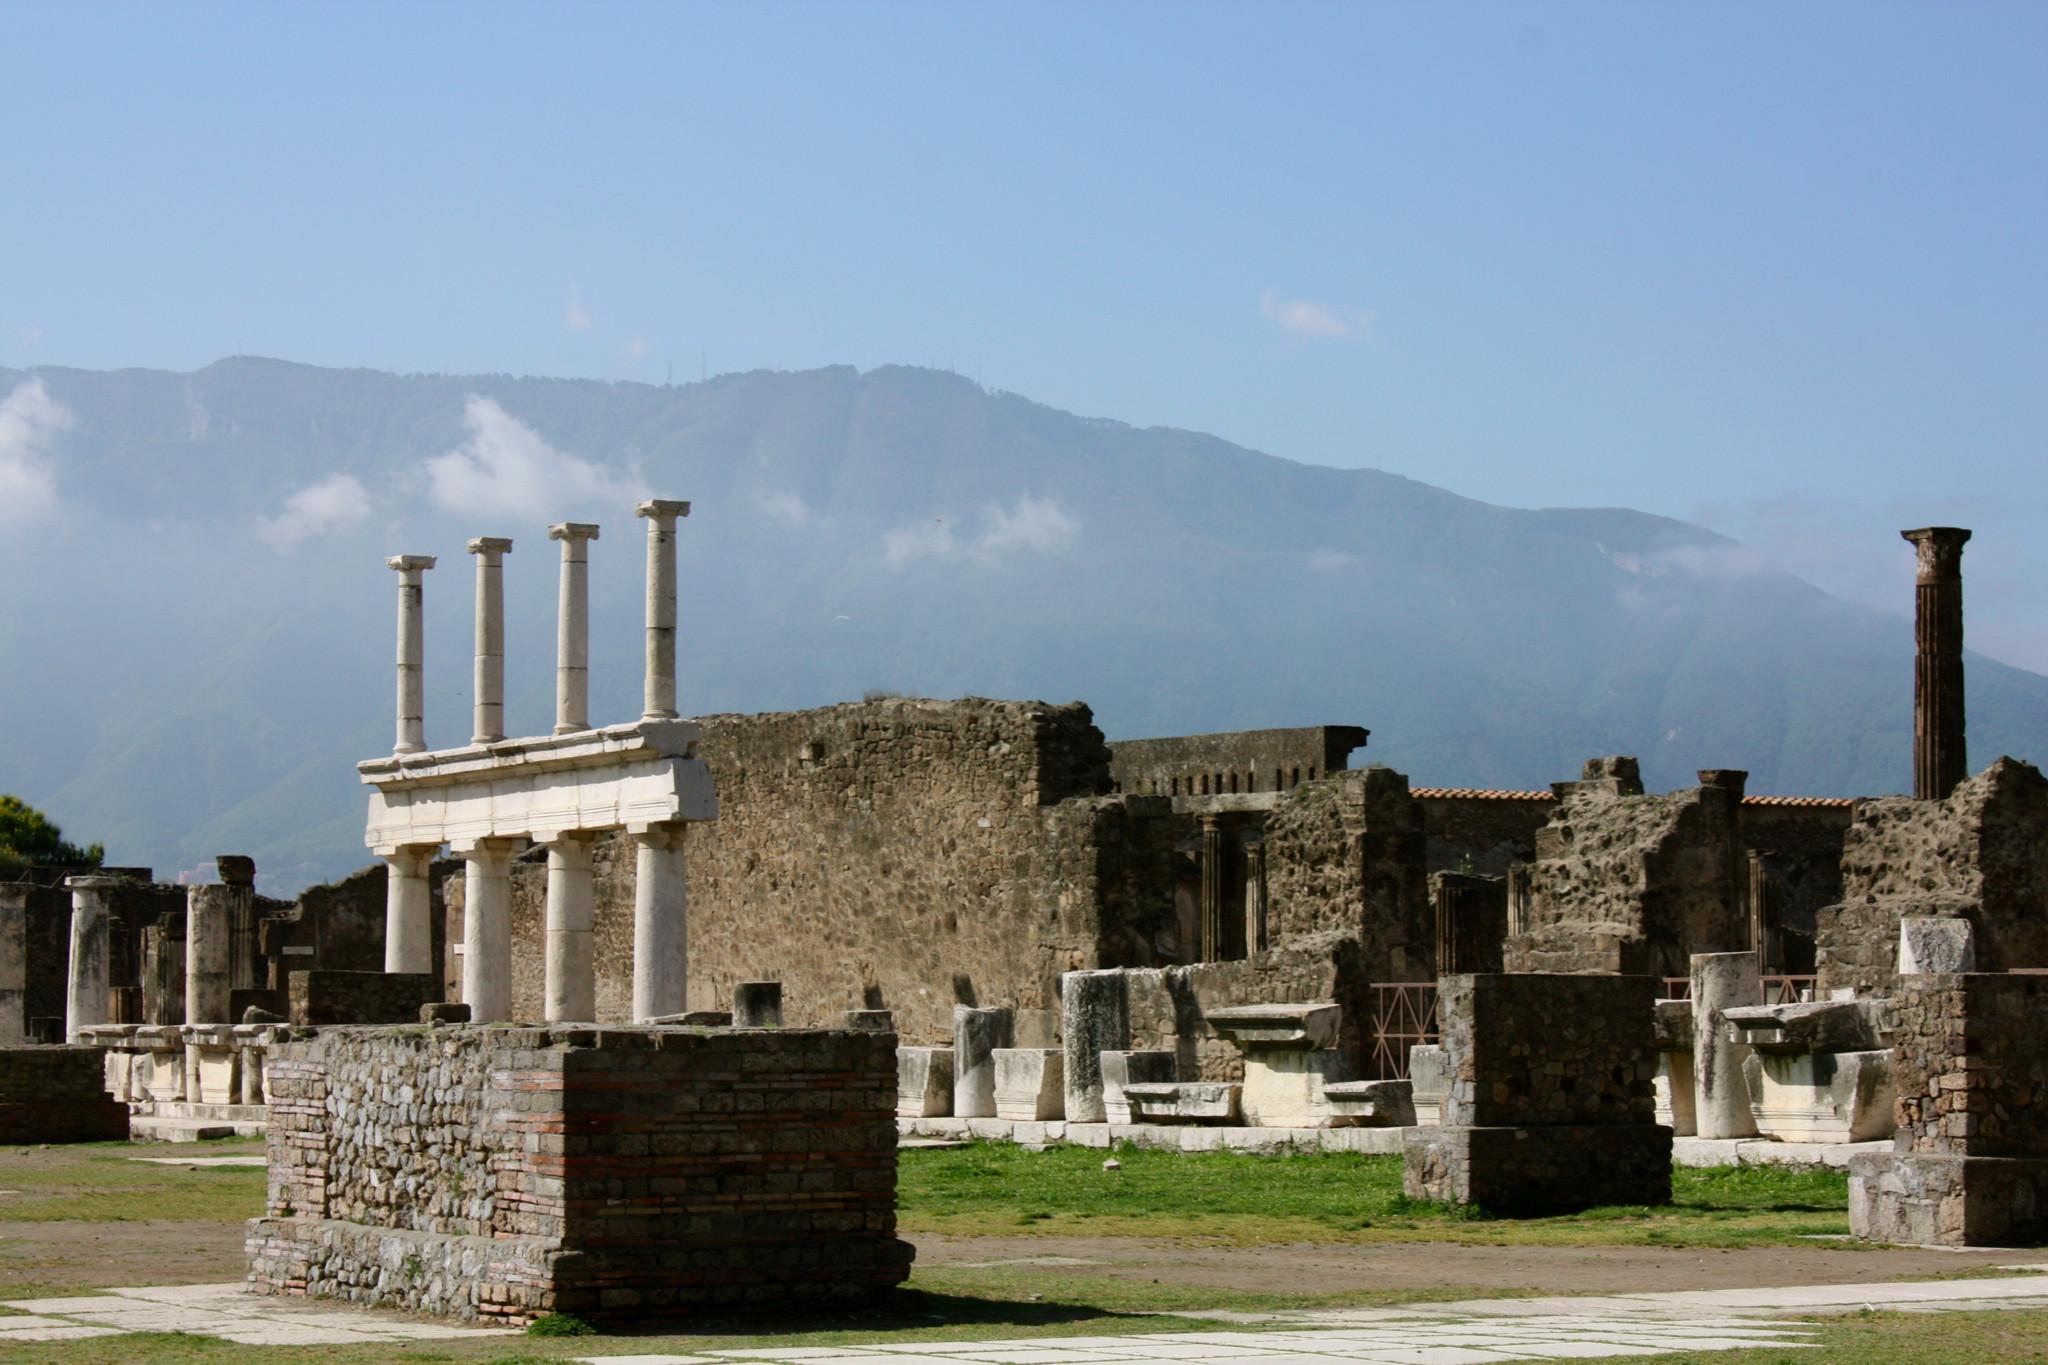 The ruins of Pompeii on a background of mountains, Italy